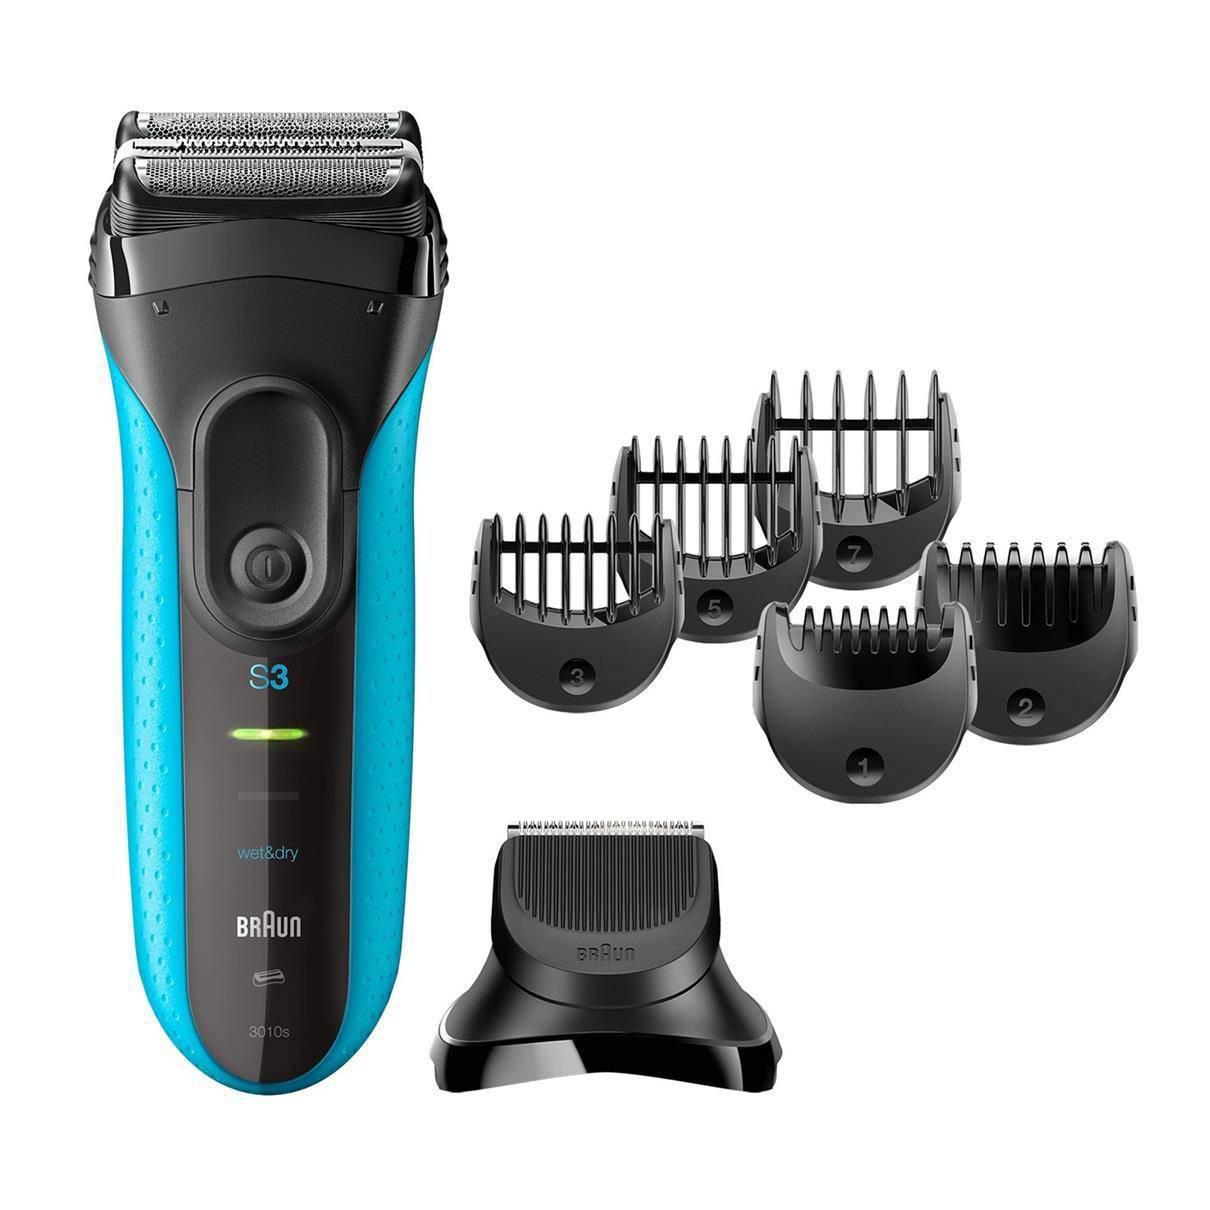 https://cdn.shopify.com/s/files/1/0073/6477/1911/files/braun-series-3-shave-style-3010bt-3-in-1-electric-shaver-with-precision-trimmer-2.jpg?v=1701961941&width=1210